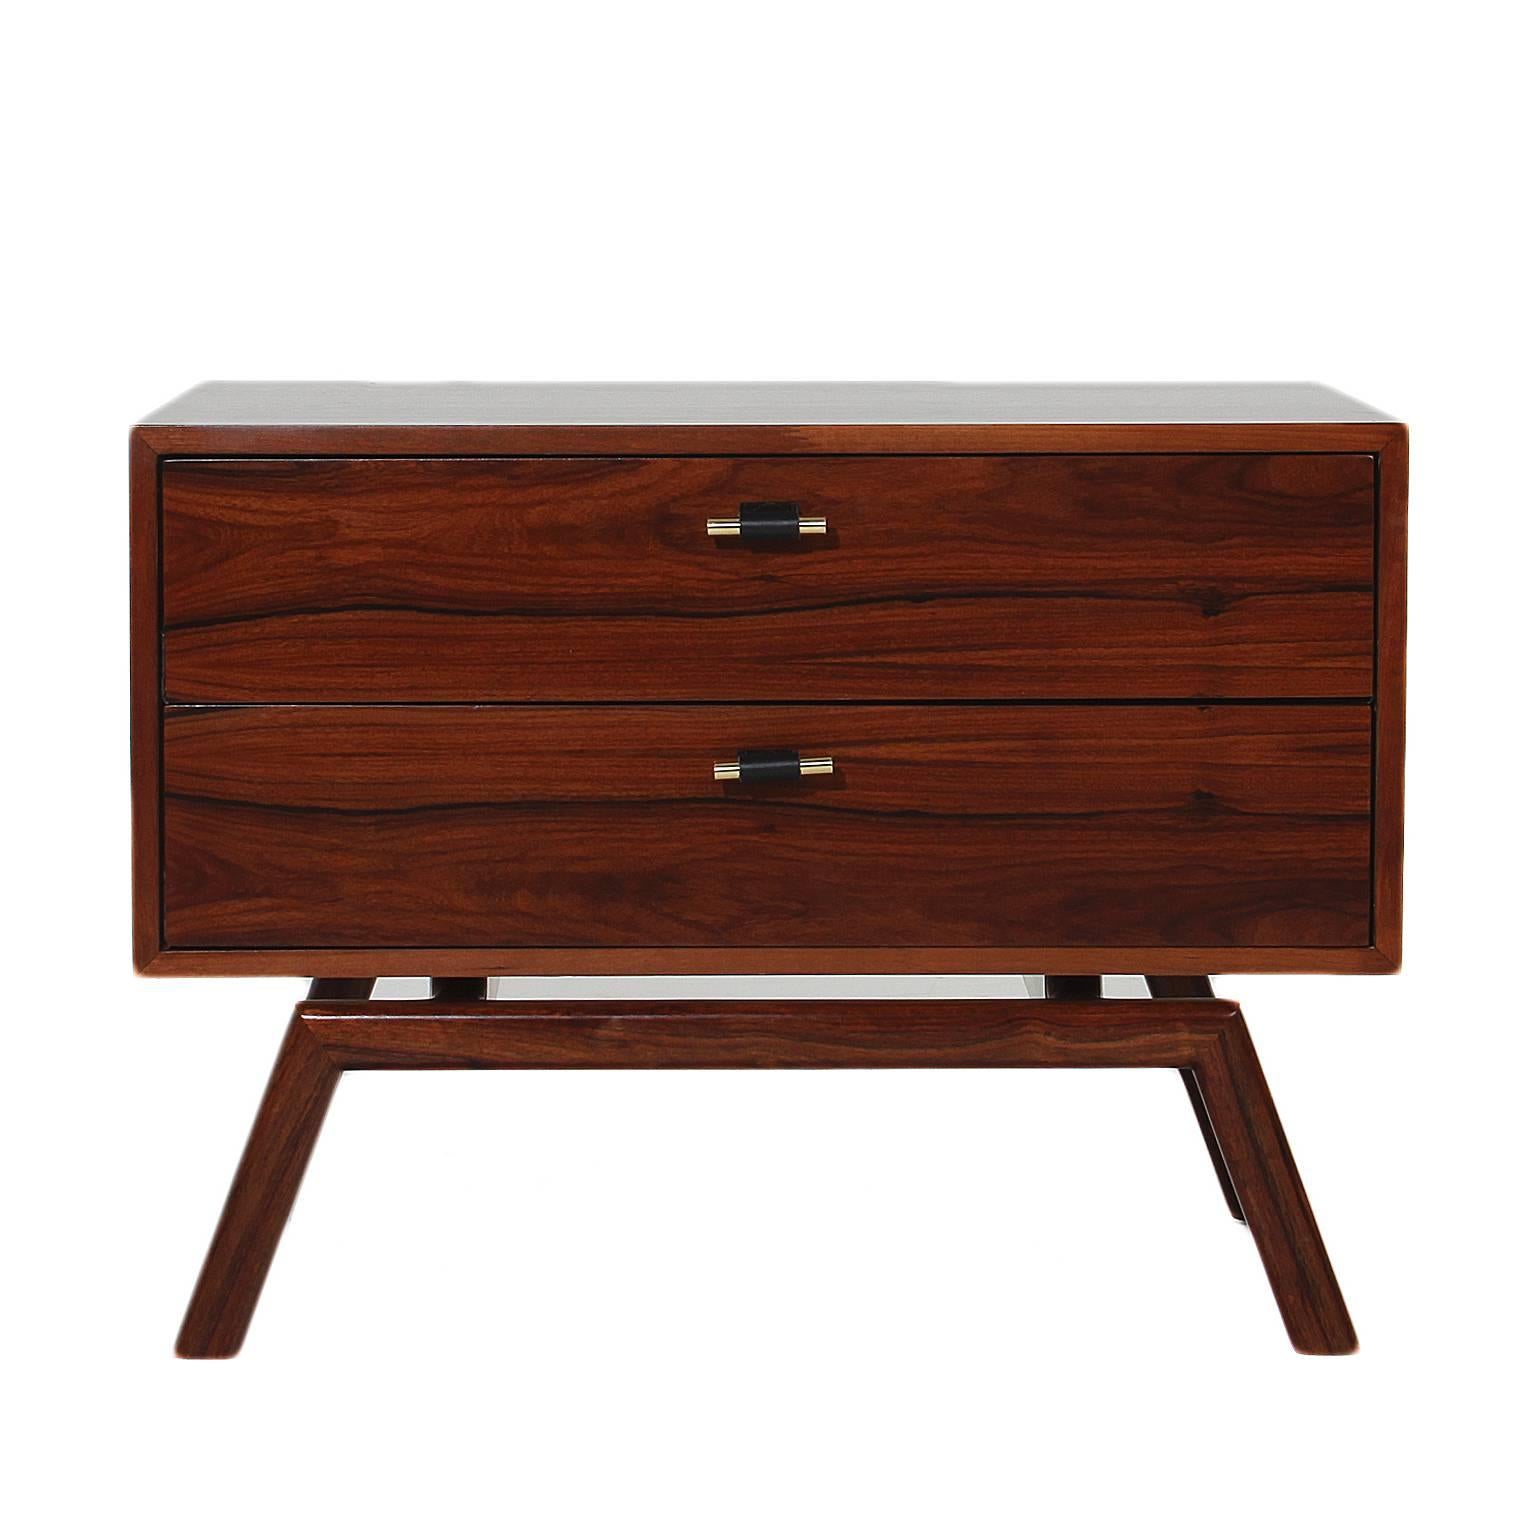 American Pair of Rosewood Side Tables with Pierced Pulls by Thomas Hayes Studio